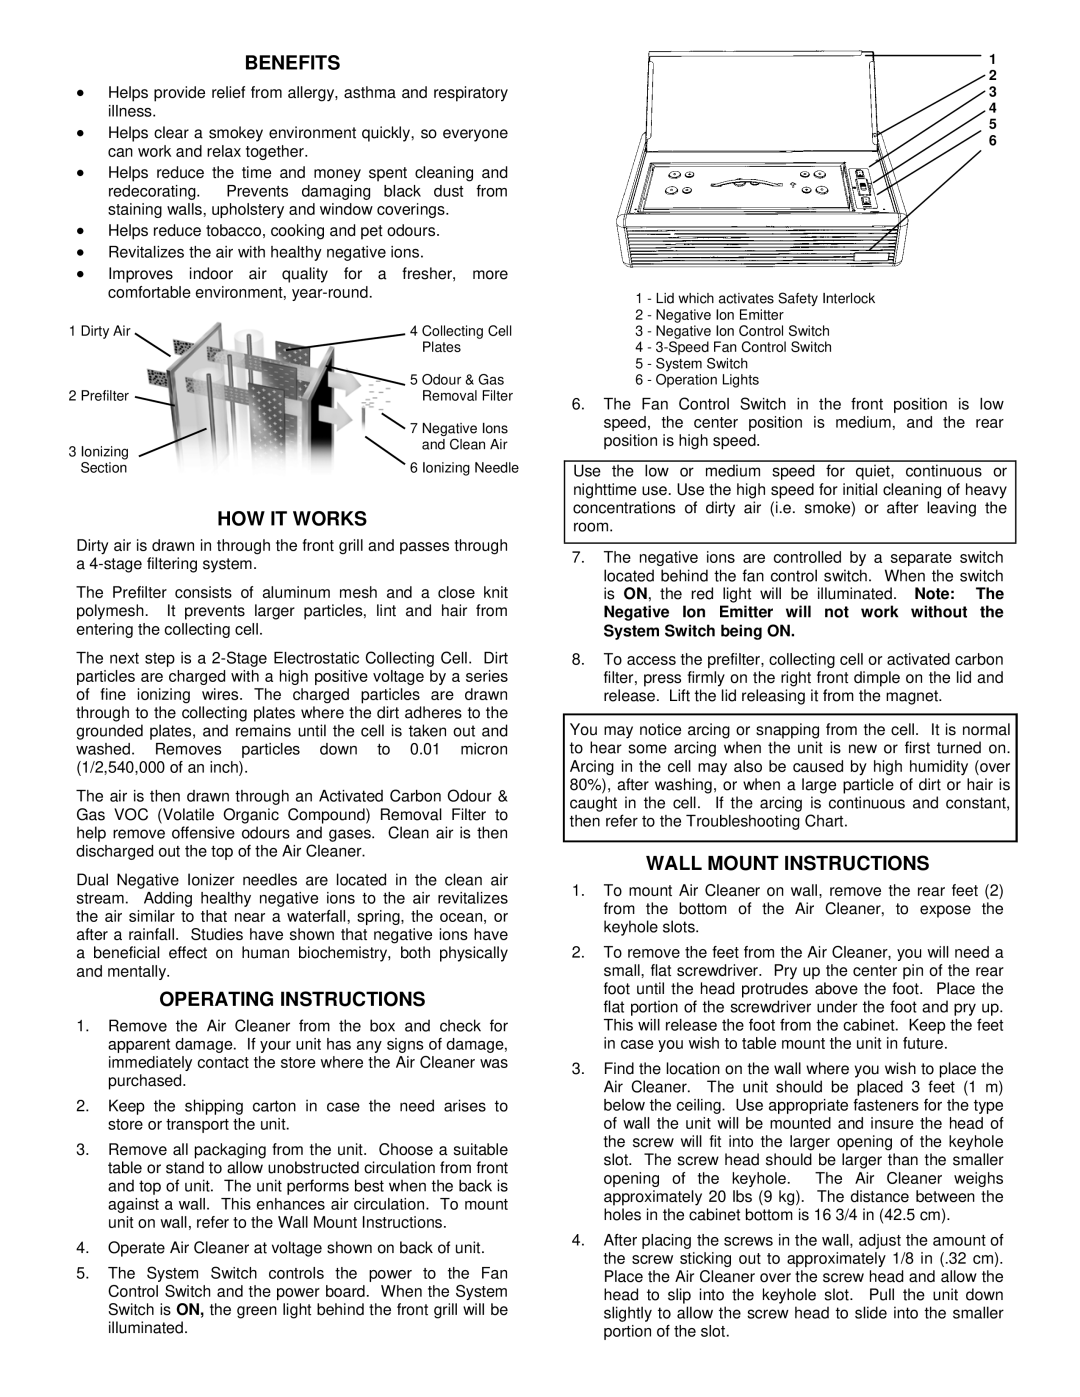 Kenmore D42 M32701 owner manual Benefits, How It Works, Operating Instructions, Wall Mount Instructions 